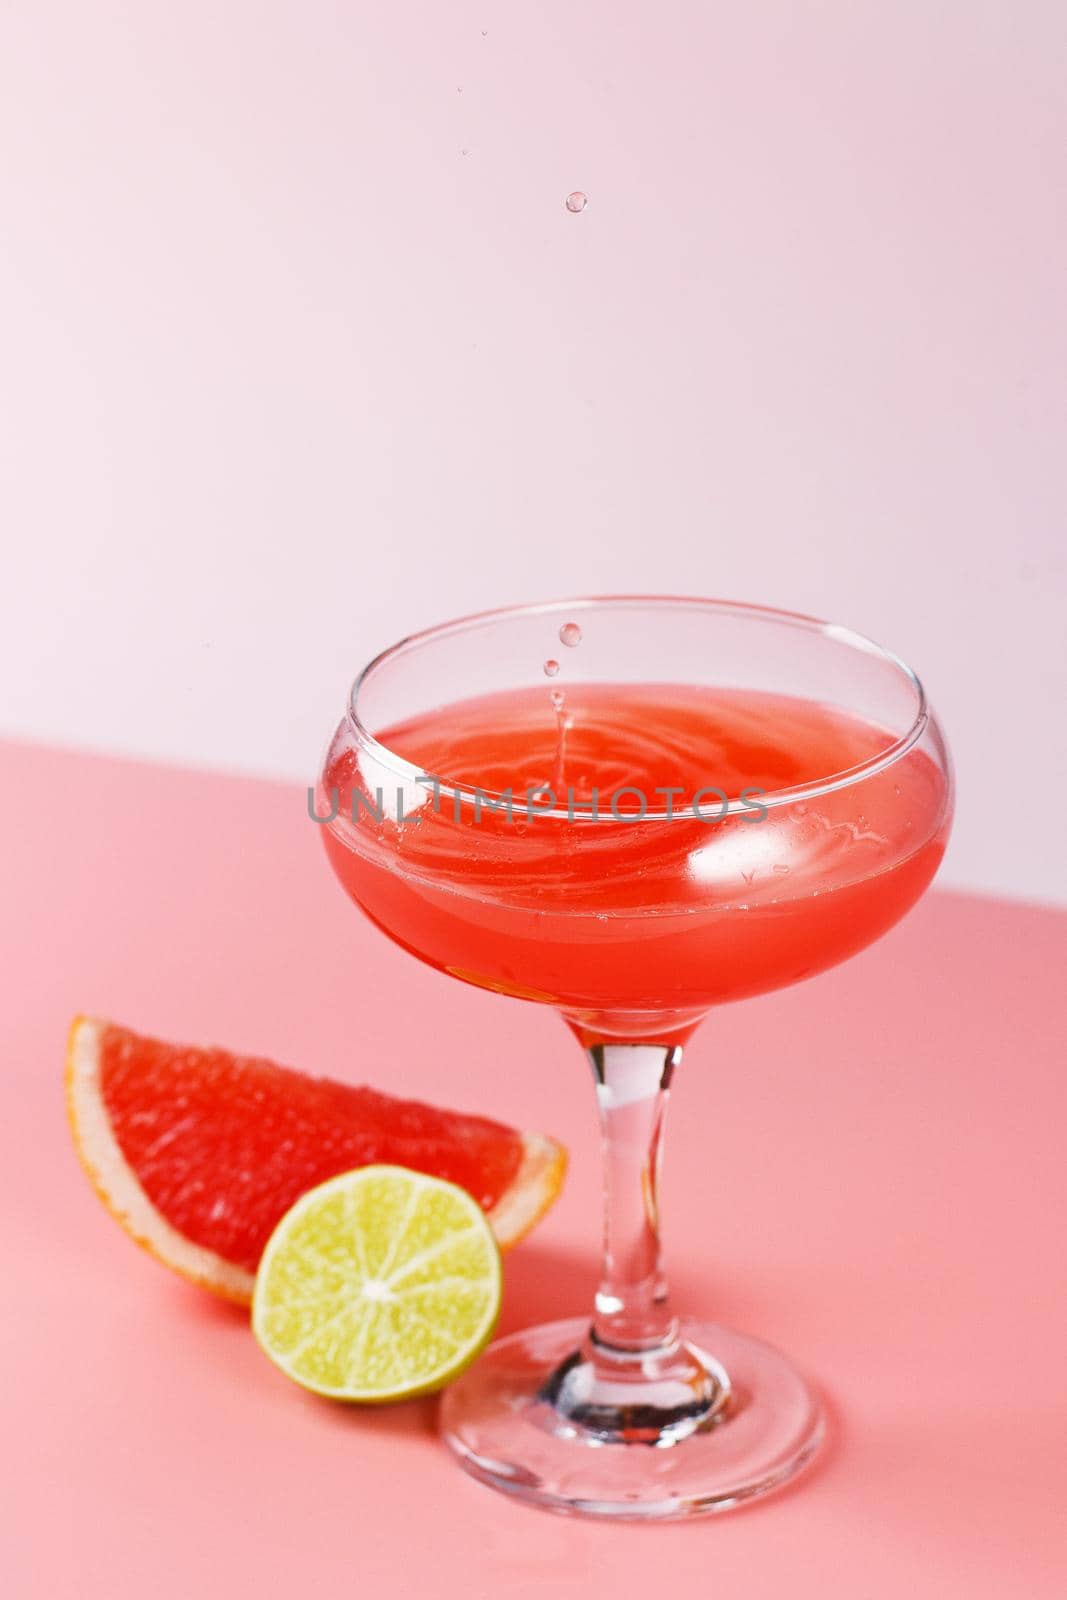 Fresh grapefruit juice with drops falling into a glass on a pink background with grapefruit slices and lime on a pink background. Copy space